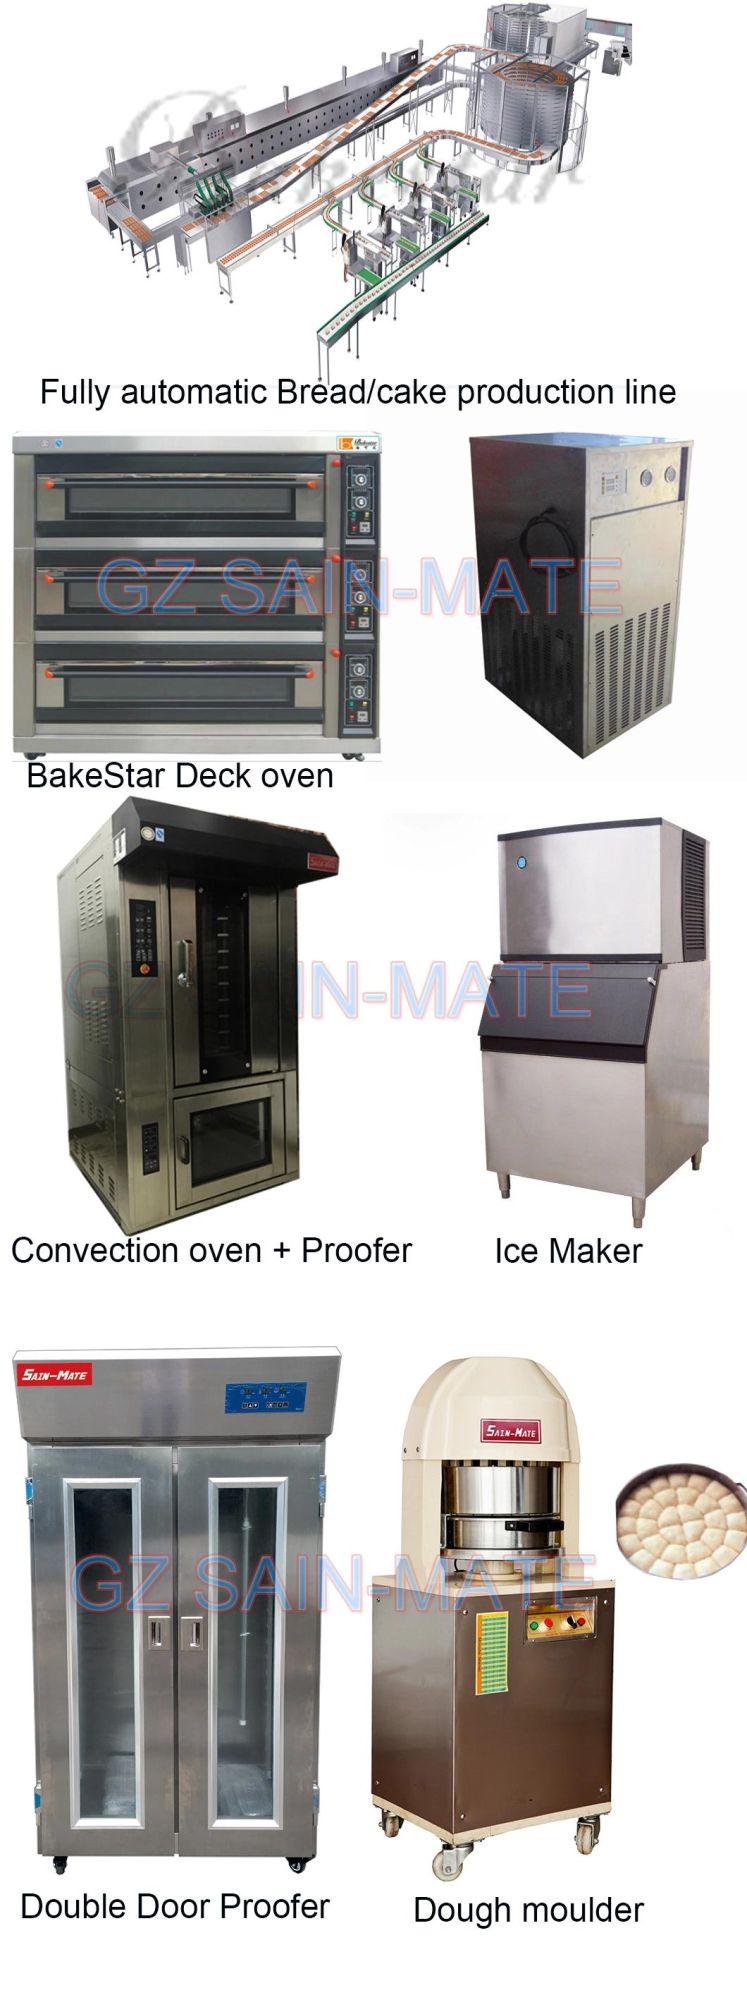 Heavy Duty Rotary Oven Gas Oven, 60 Inch Rotary Table Pita Bread Oven